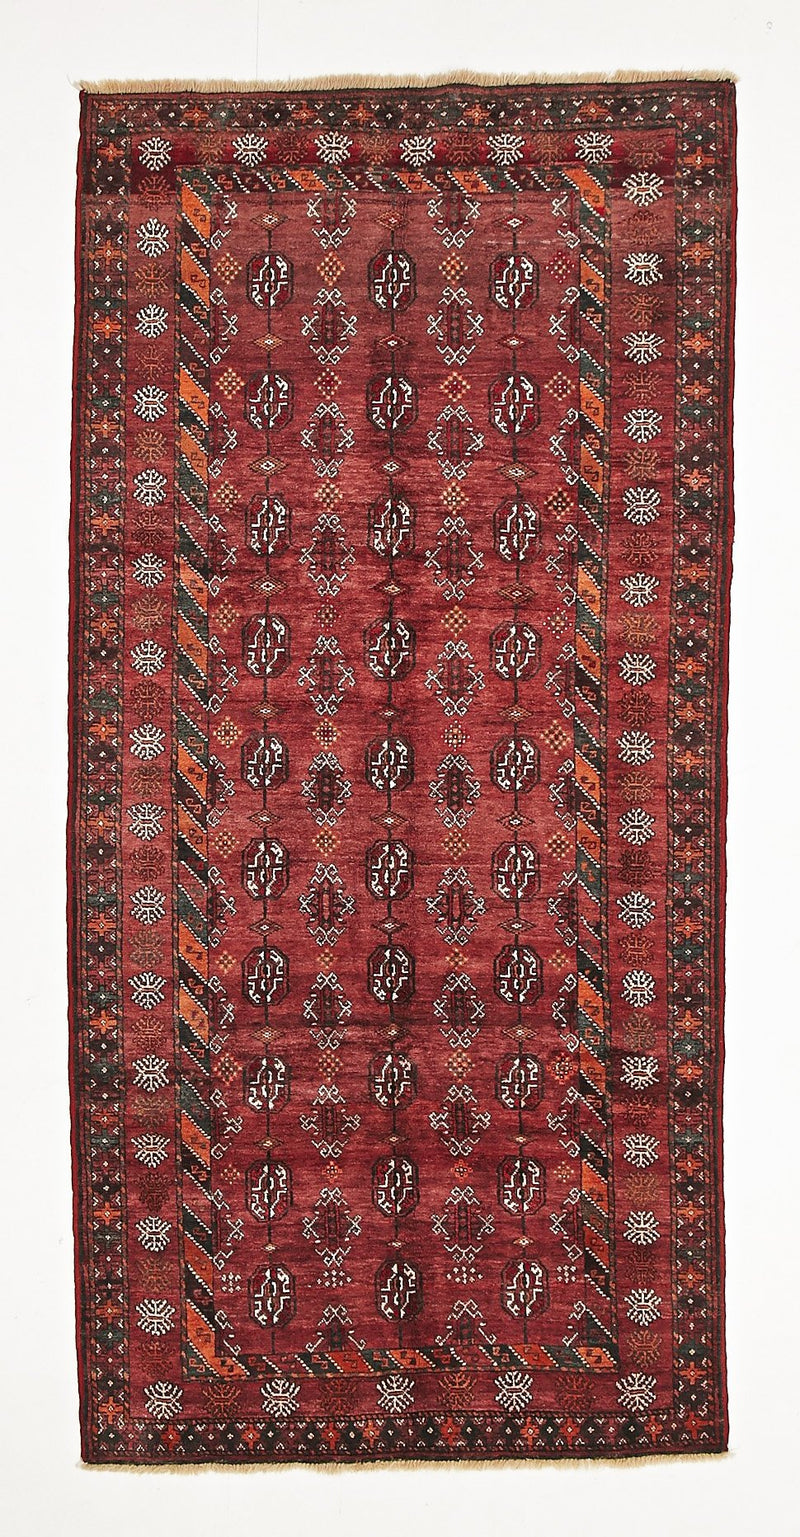 HAND KNOTTED PERSIAN FINE BALUCH RUG 277 X 130 CM